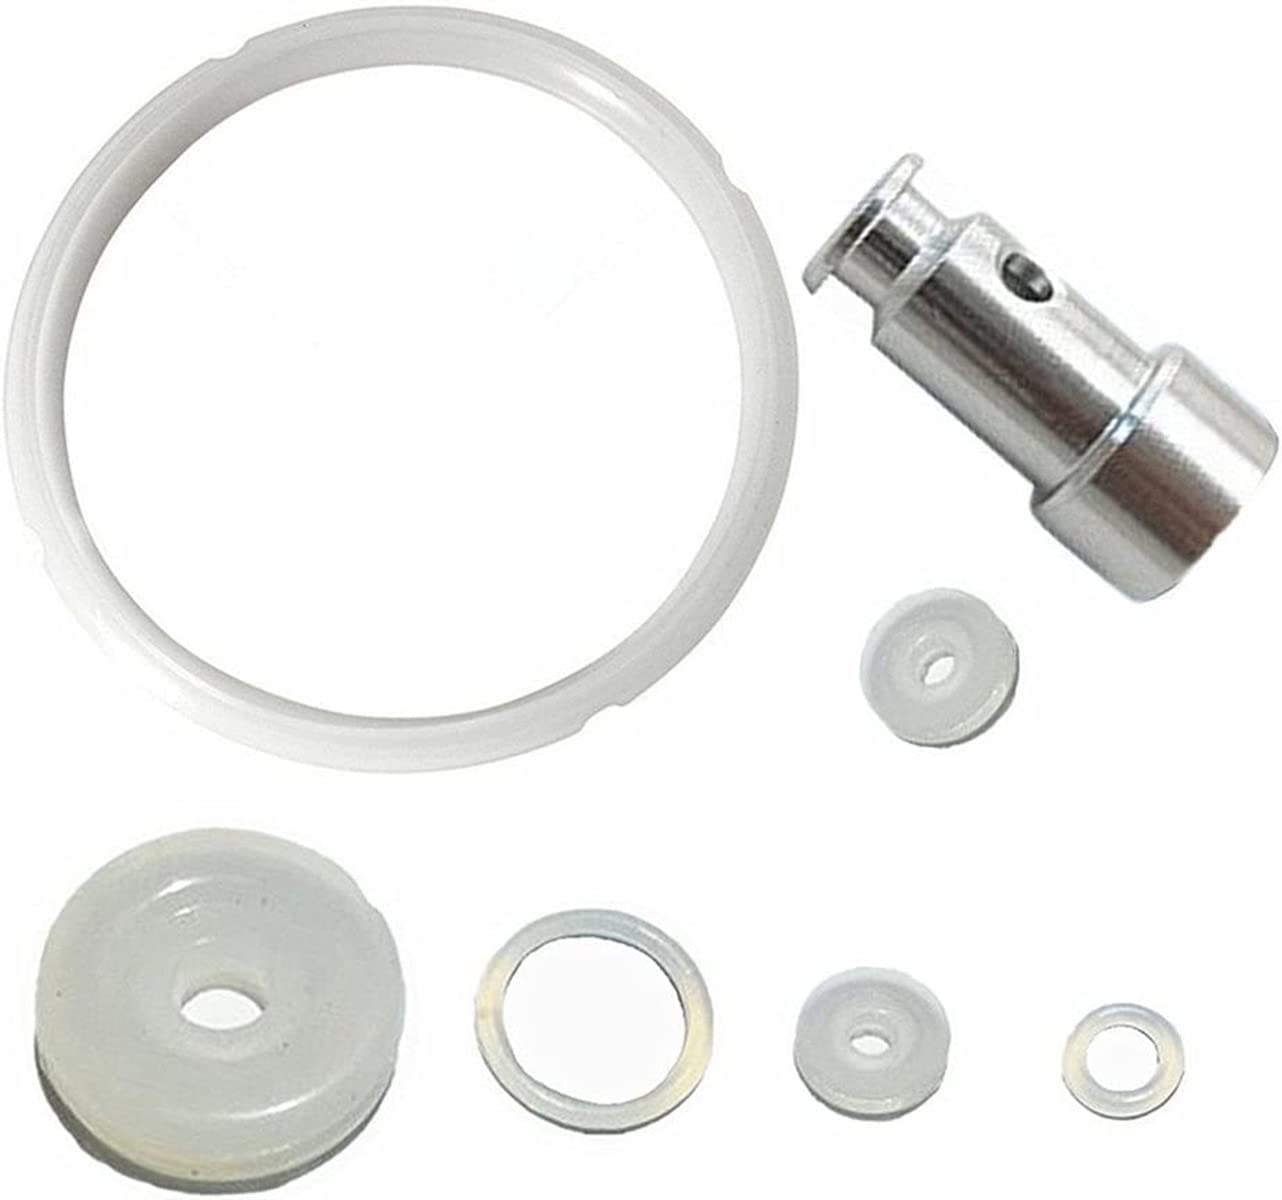 Pressure Cooker Gaskets Silicone Sealing Rings and Universal Replacement Floater and Sealer for 5 or 6 Quart Models -Set of 7